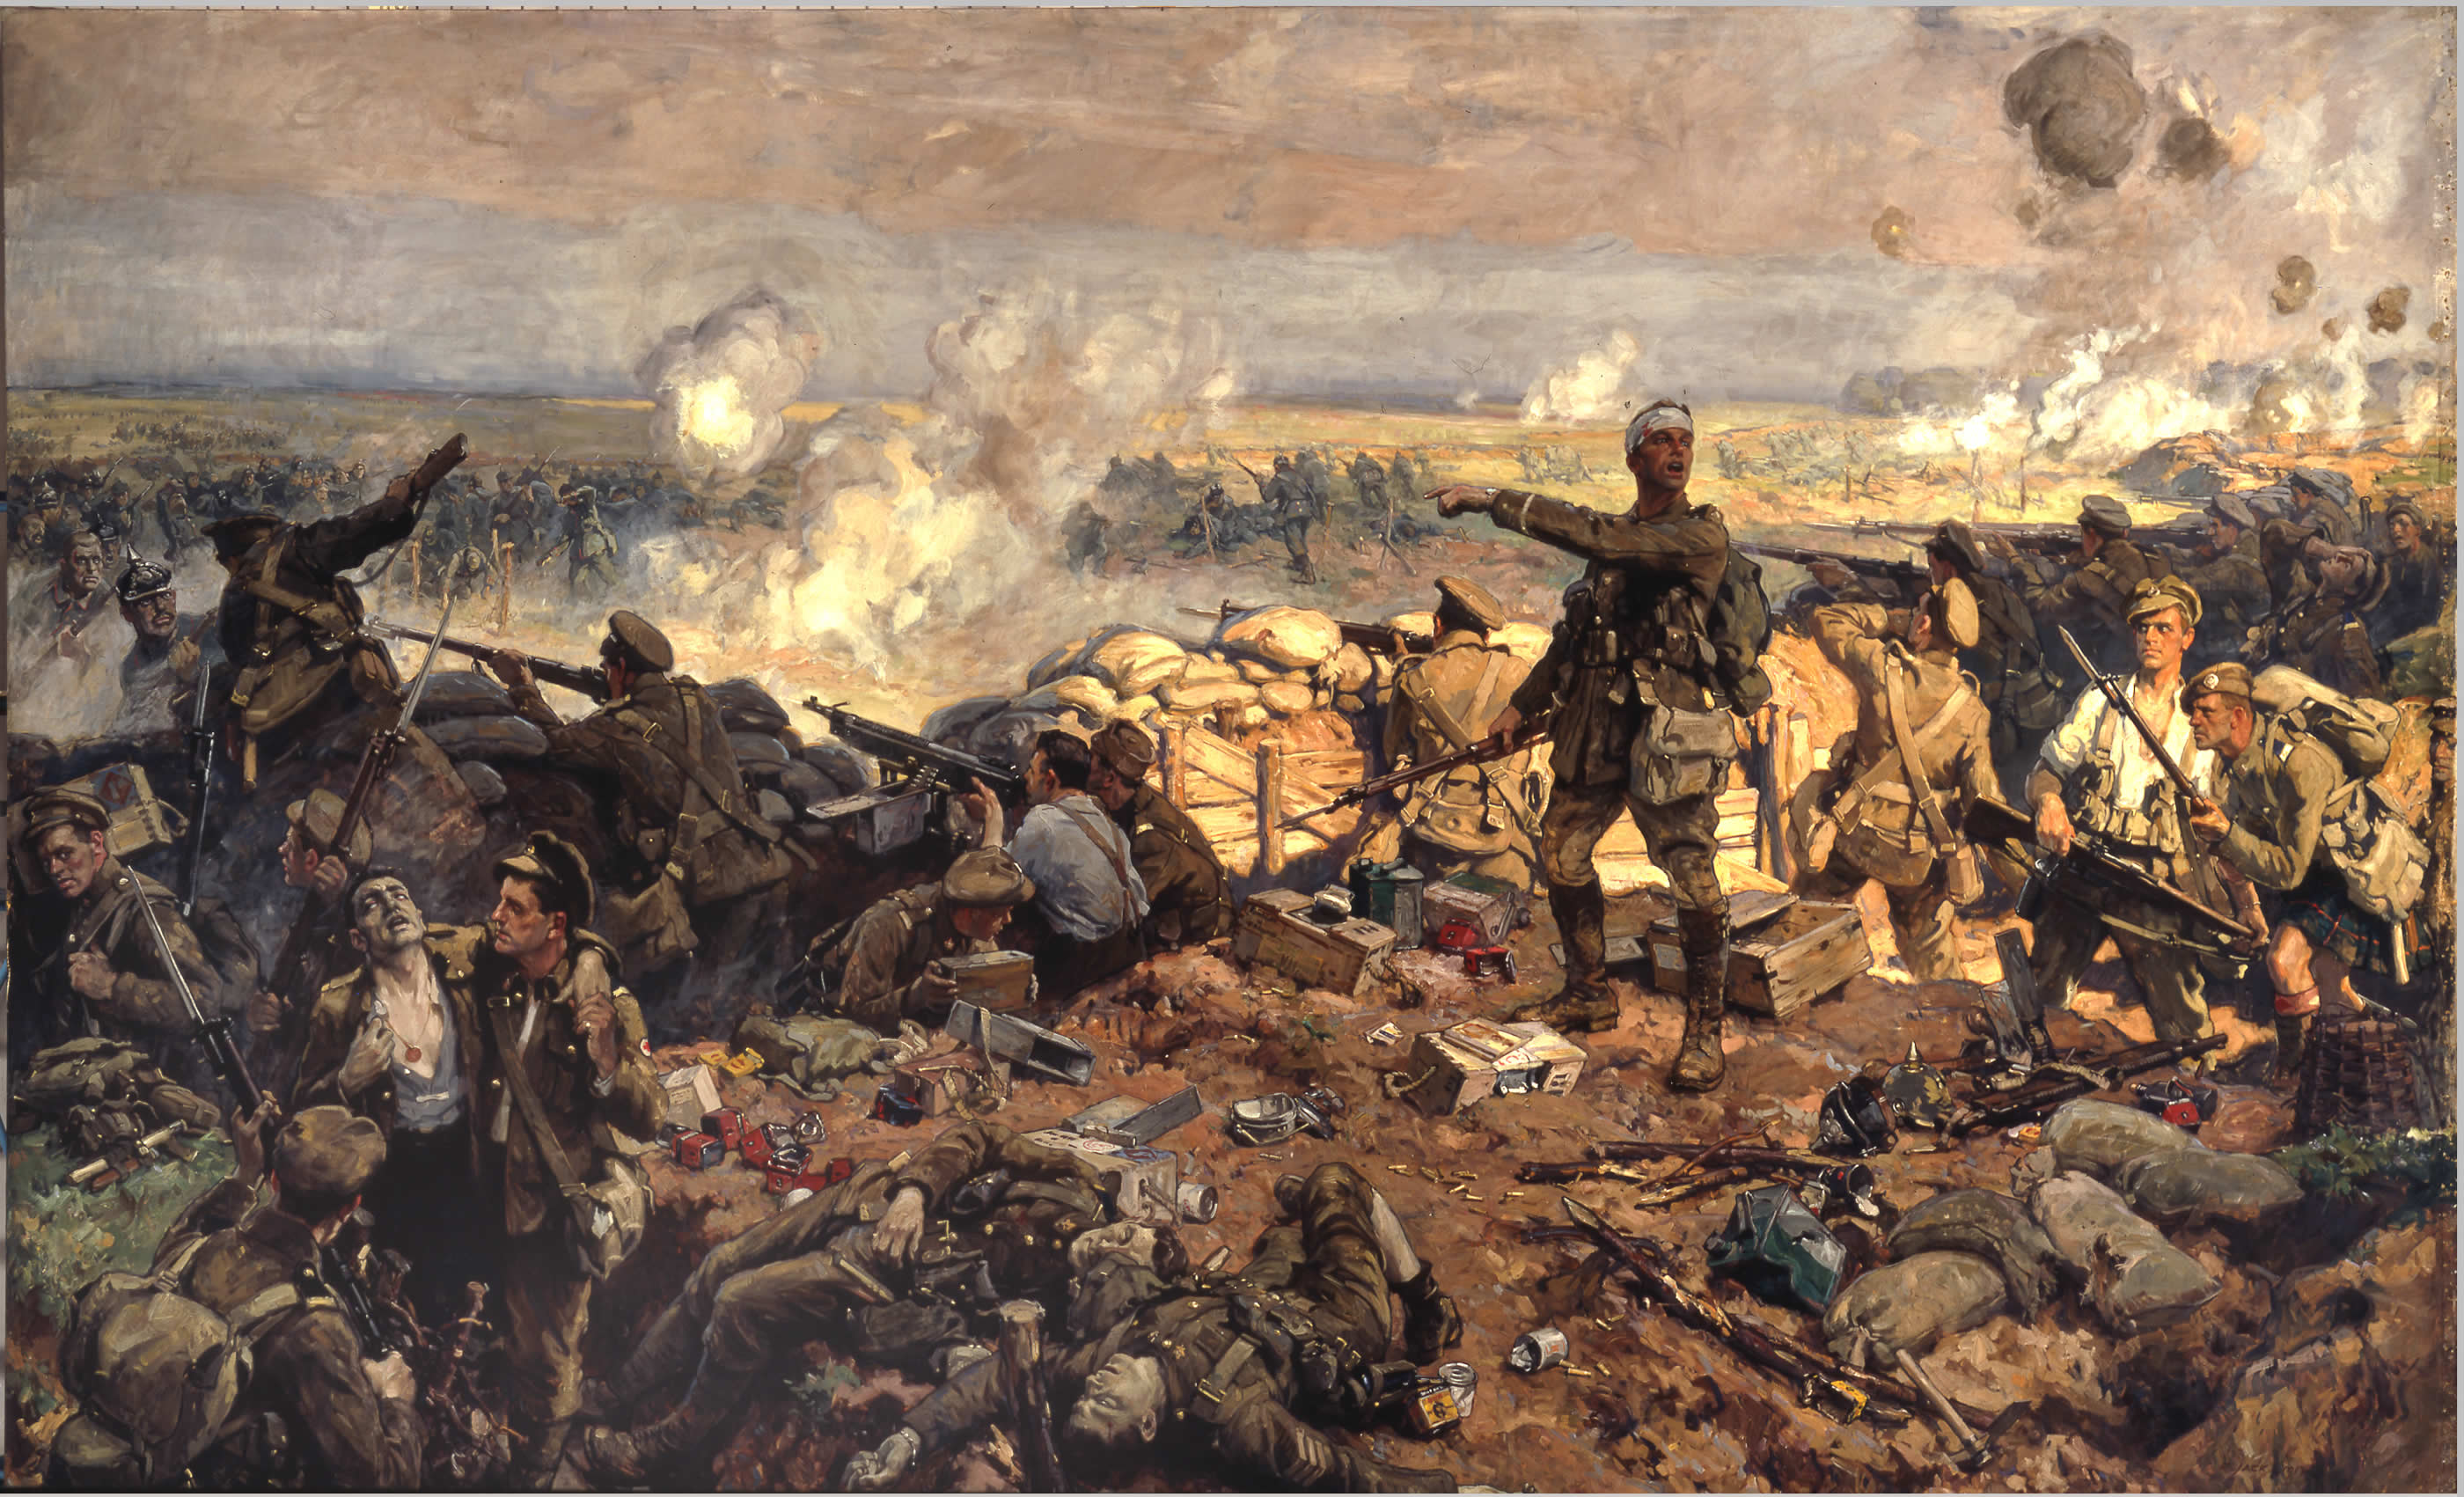 The Second Battle of Ypres 1915 (image provided by wikipedia)